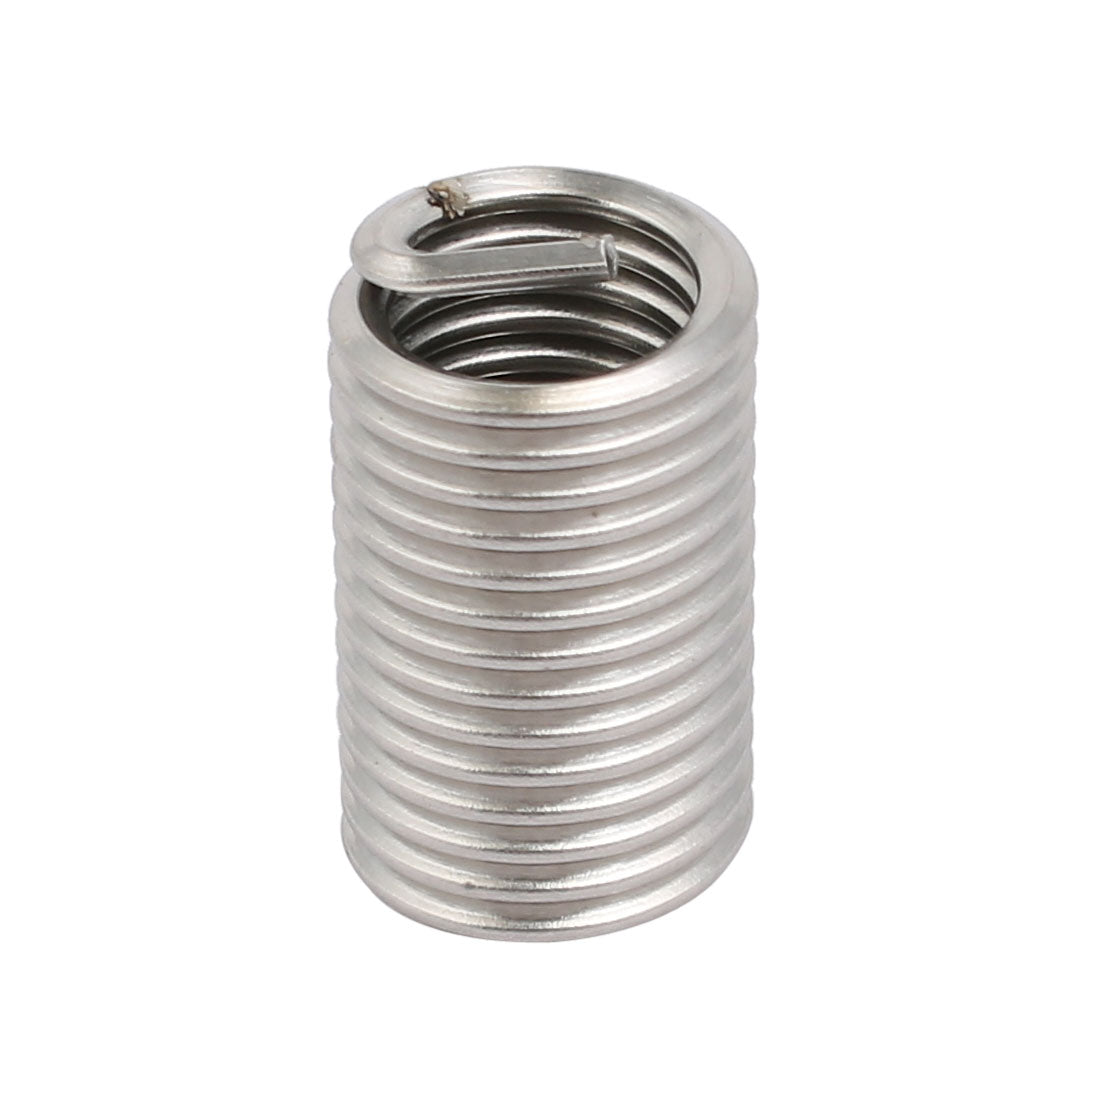 uxcell Uxcell 3/8-16x1.125" 304 Stainless Steel Helical Coil Wire Thread Insert 12pcs